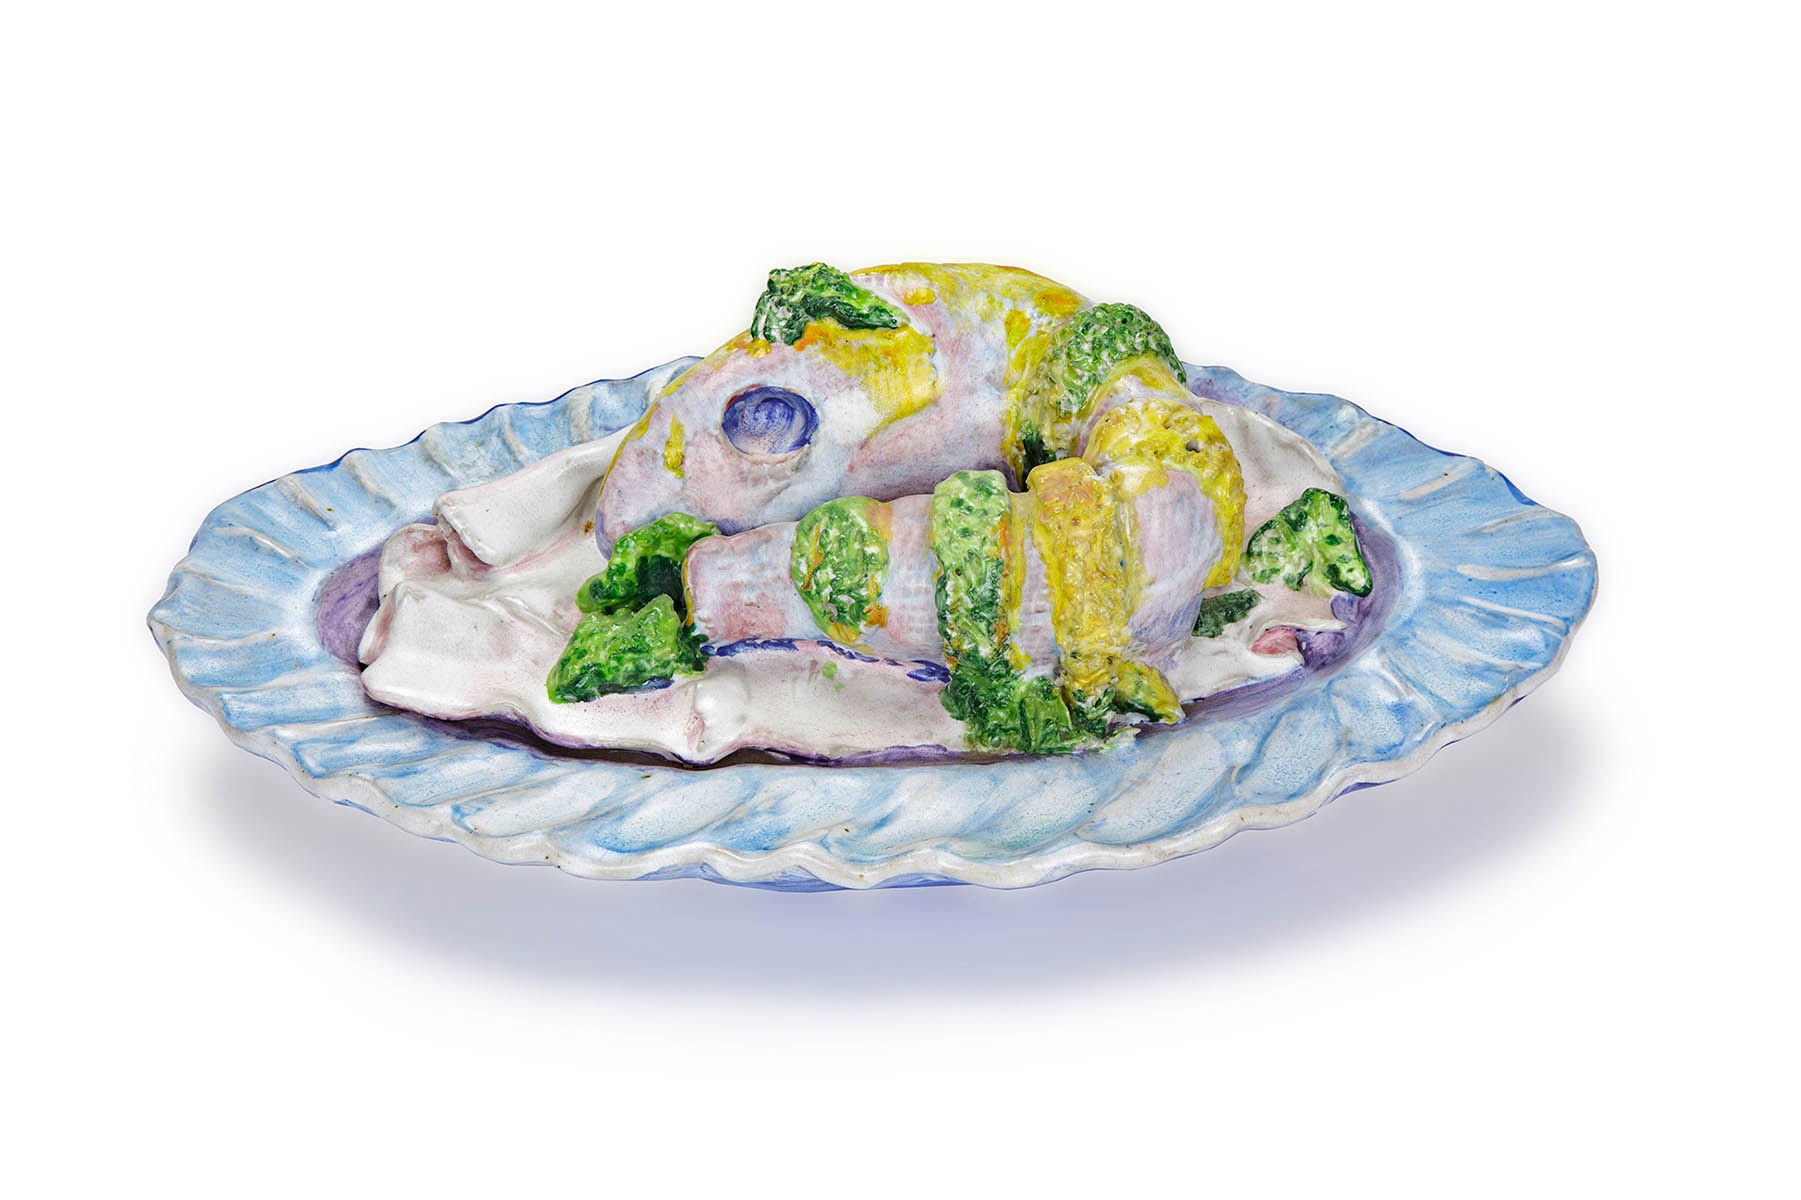 Robert Arneson, A Boiled Fresh Haddock With Butter And Parsley, 1970